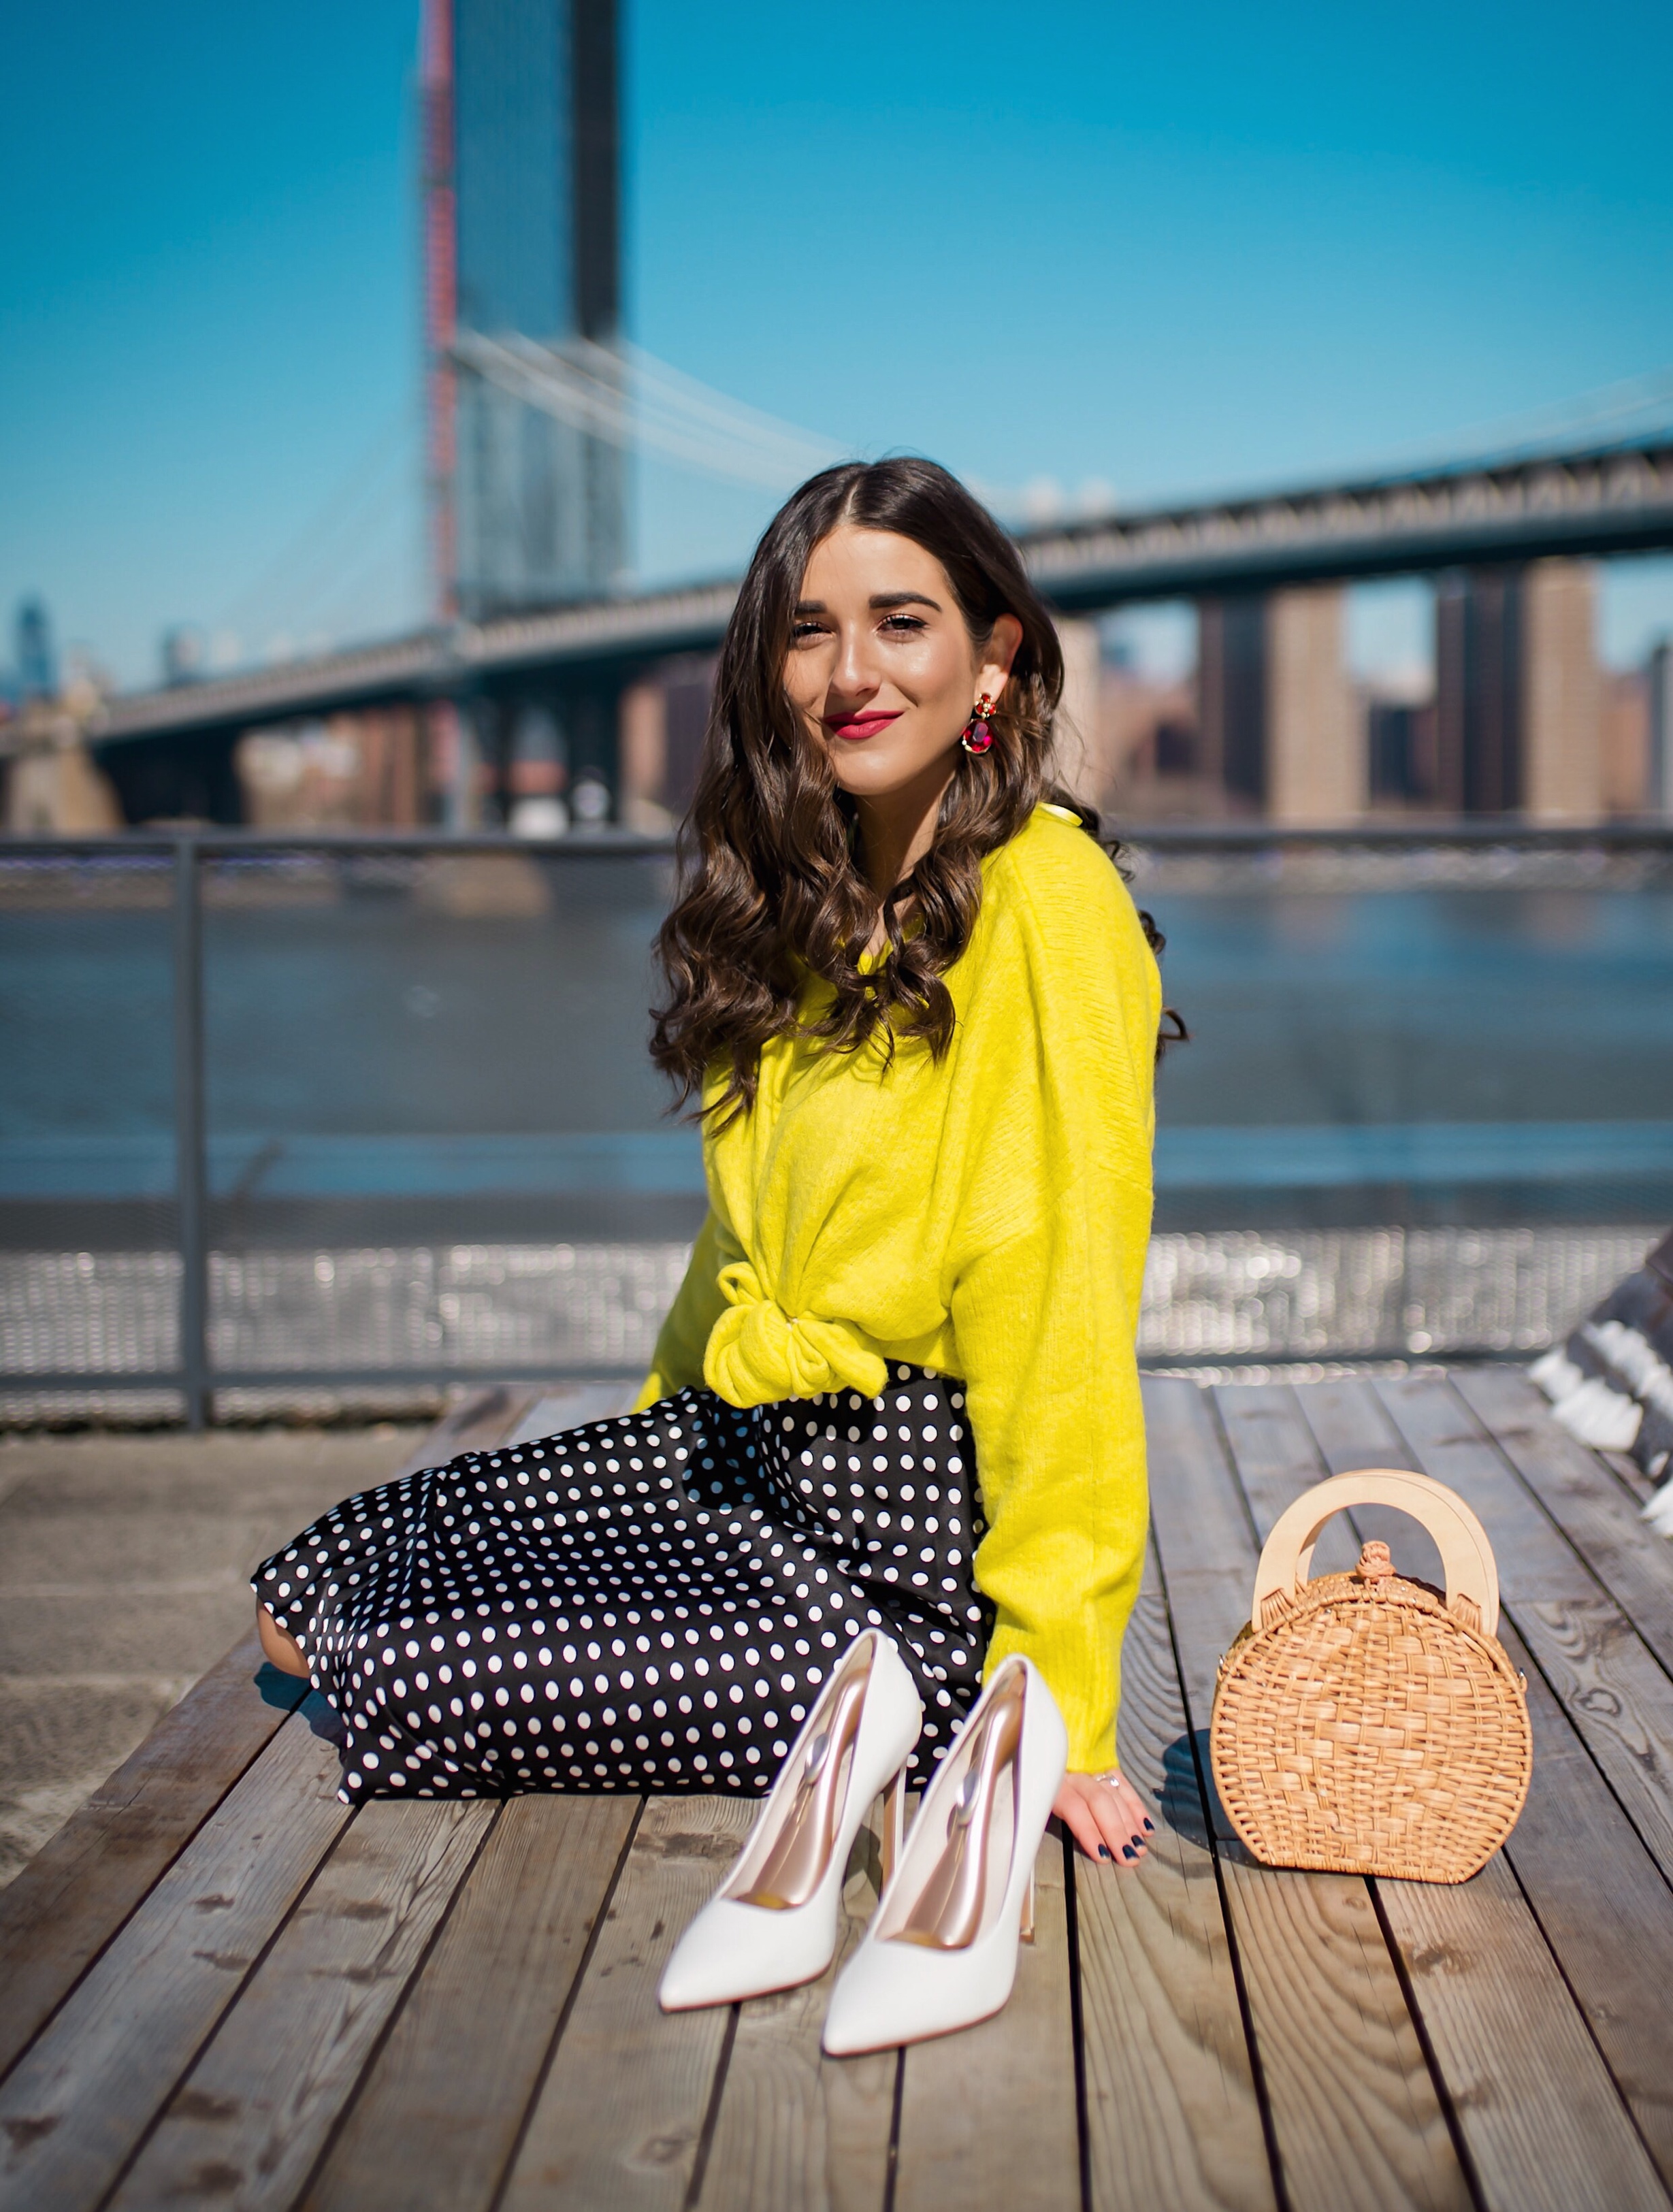 How I Wound Up With Boring White Dishes // Navy Polka Dot Dress + Neon  Yellow Sweater — Esther Santer